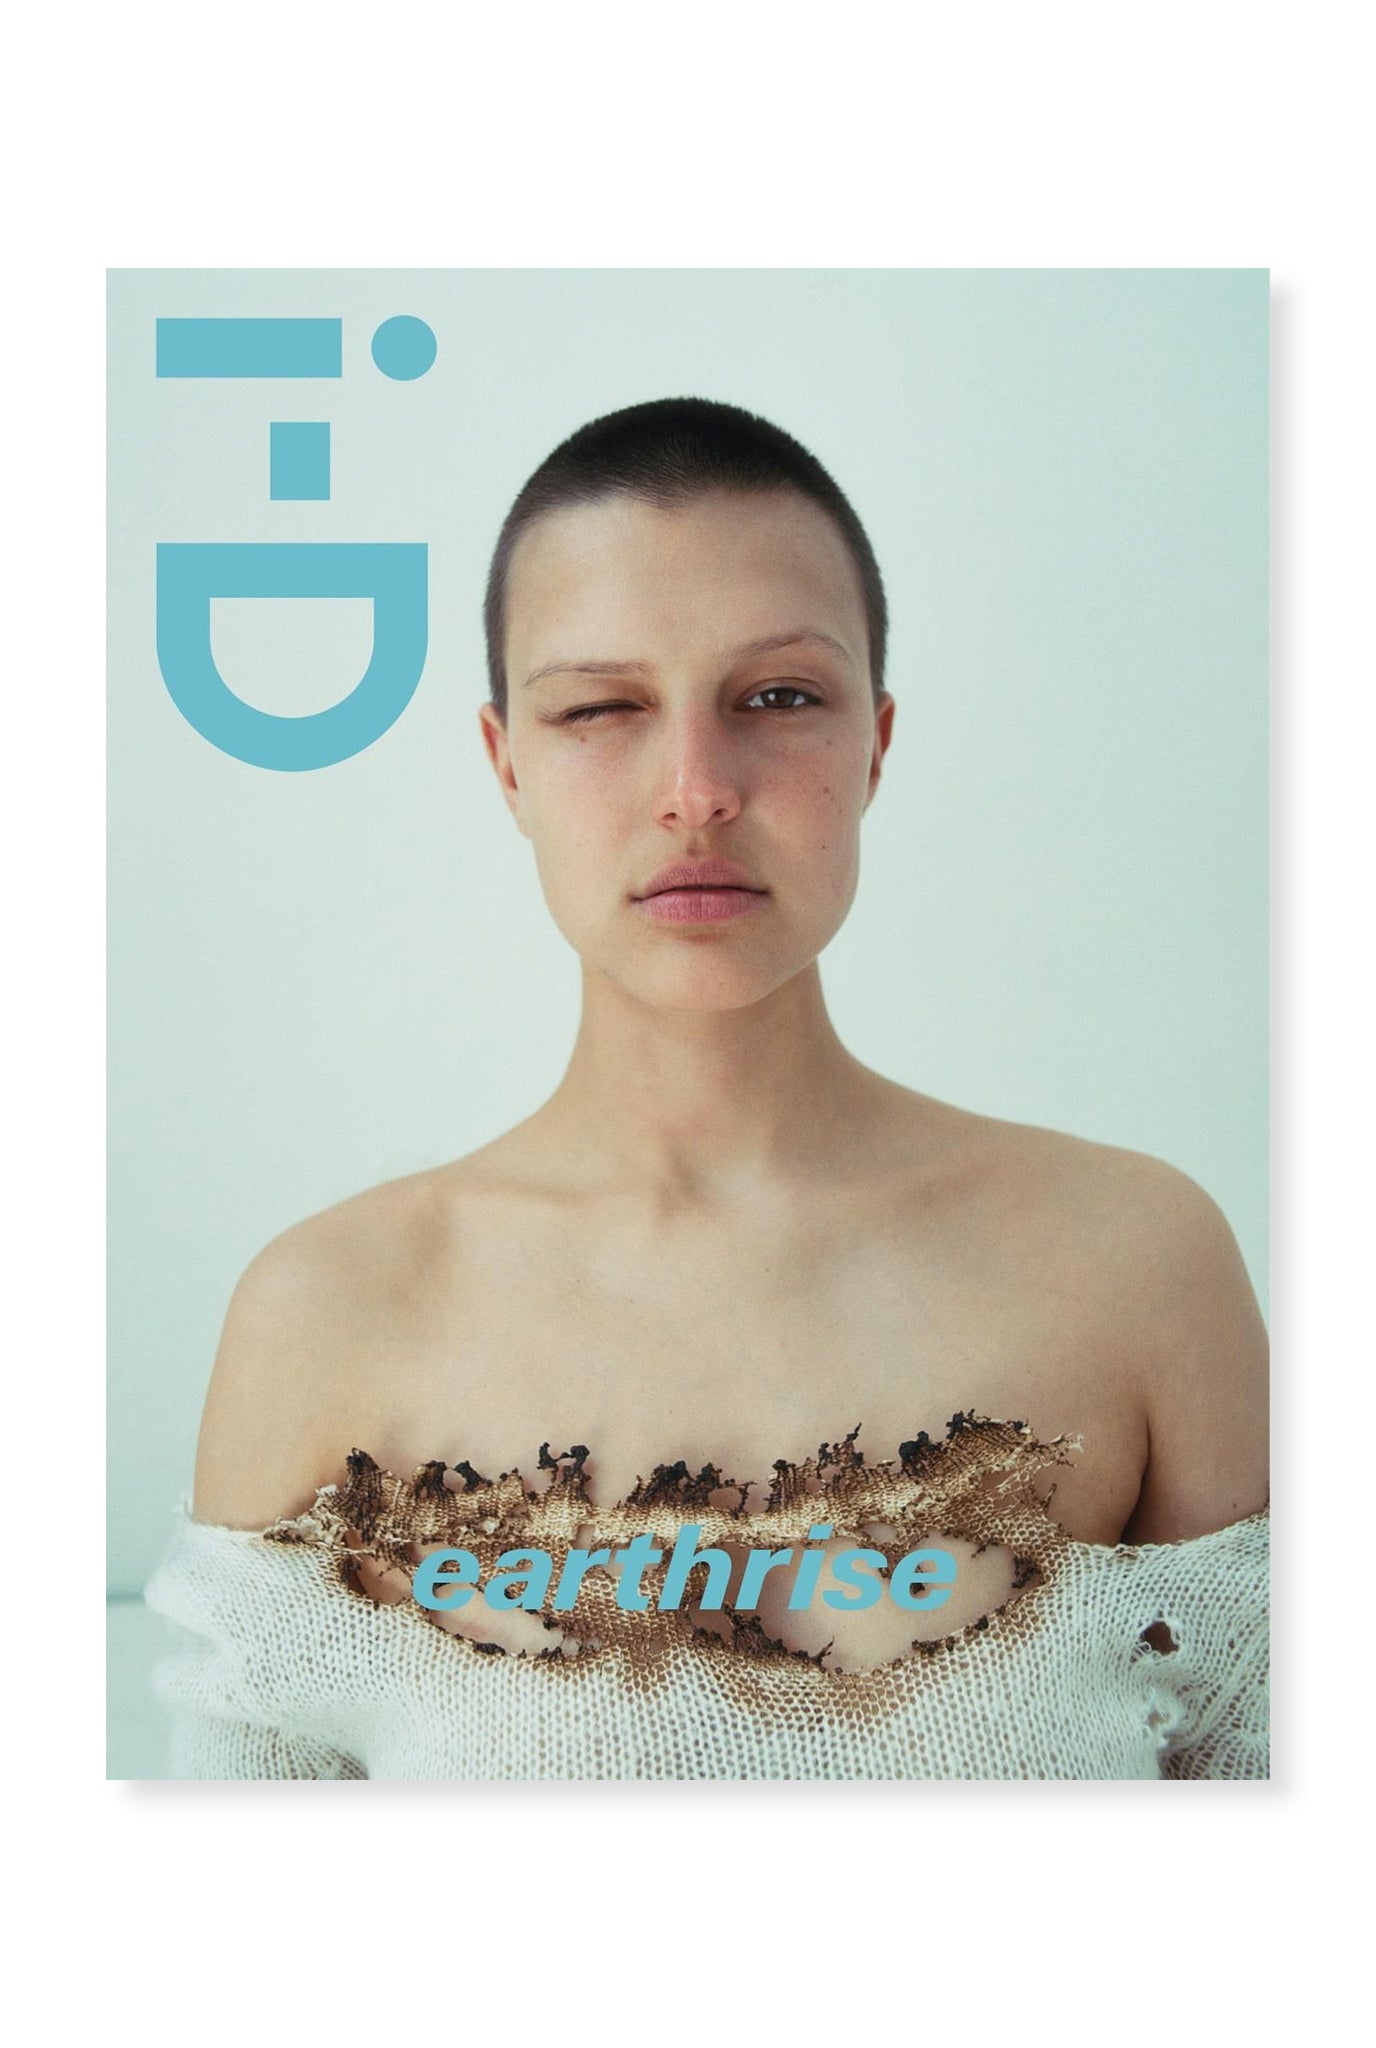 i-D, Issue 368 - Earthrise